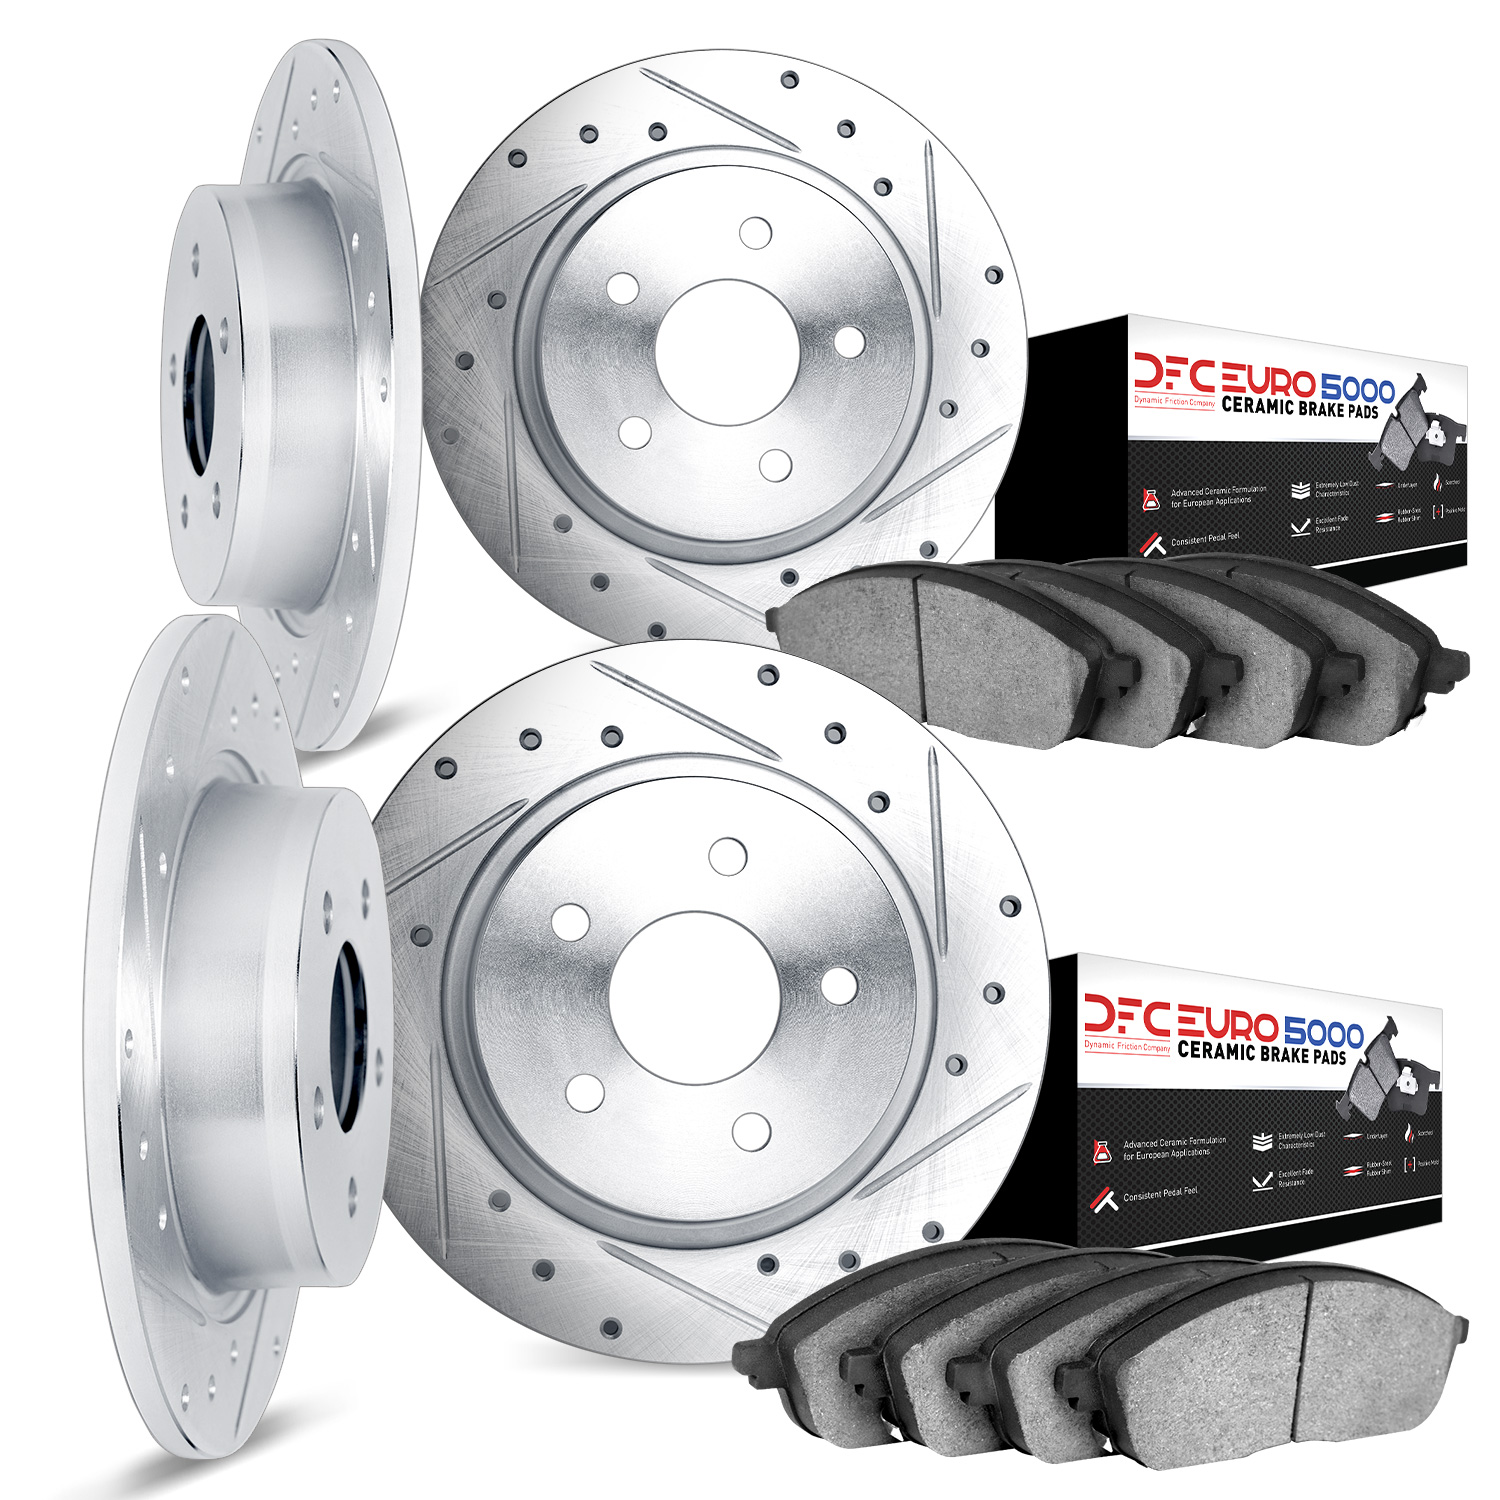 7604-27000 Drilled/Slotted Brake Rotors w/5000 Euro Ceramic Brake Pads Kit [Silver], 1975-1987 Volvo, Position: Front and Rear